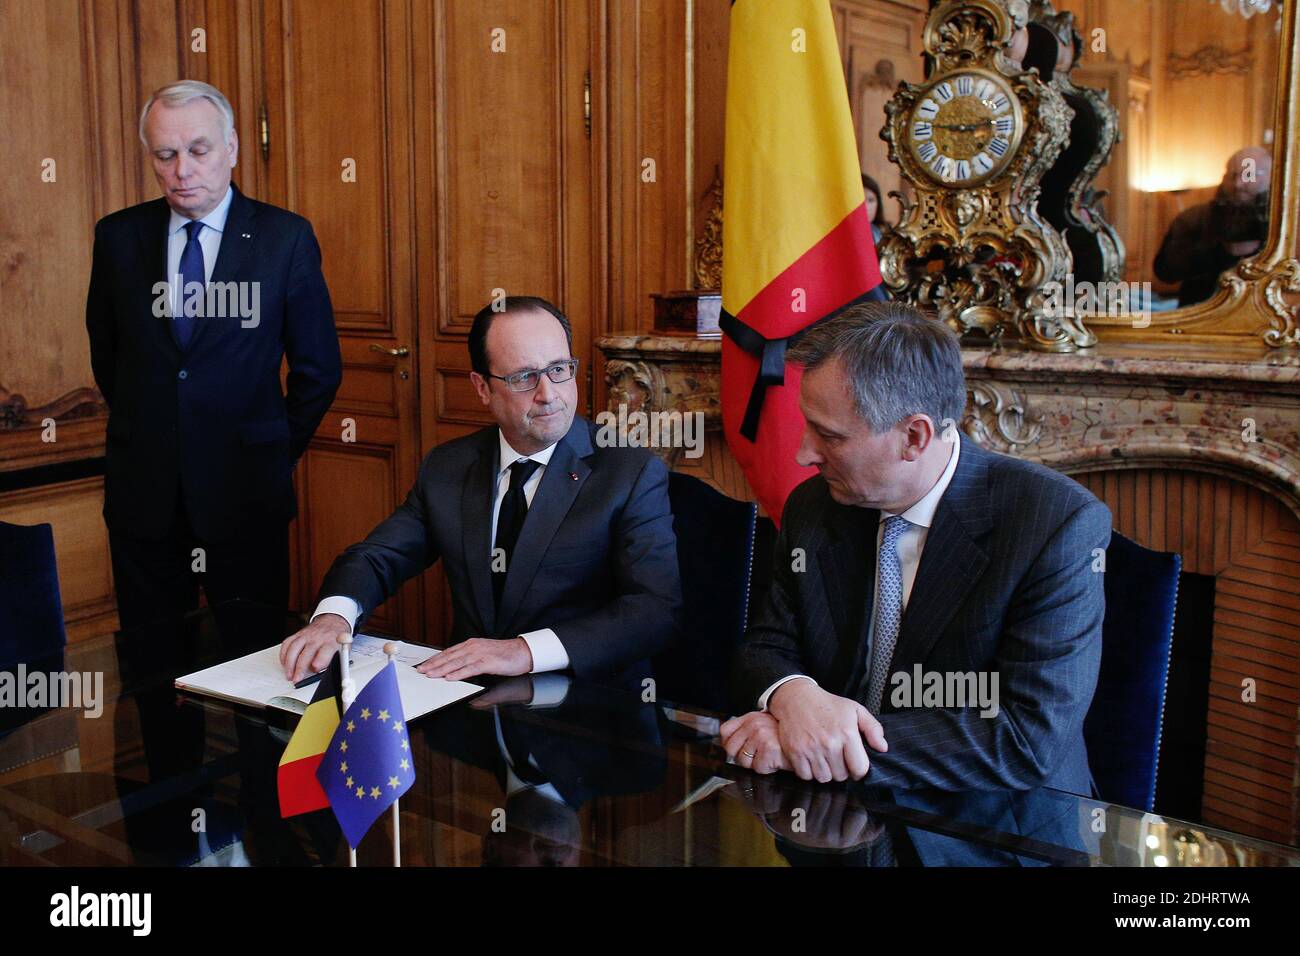 France's President Francois Hollande (C) signs the condolence book as Belgium's Ambassador to France Vincent Mertens de Wilmars (R) and French Minister of Foreign Affairs and International Development Jean-Marc Ayrault look on after paying homage to the victims of the Brussels terror attacks, at the Belgium embassy in Paris, France on Tuesday, March 22, 2016. Bombs exploded at the Brussels airport and one of the city's metro stations earlier today, killing at least 34 and injuring dozens of people. The Islamic State group claimed responsibility for the attacks. Photo by Thibault Camus/Pool/ABA Stock Photo